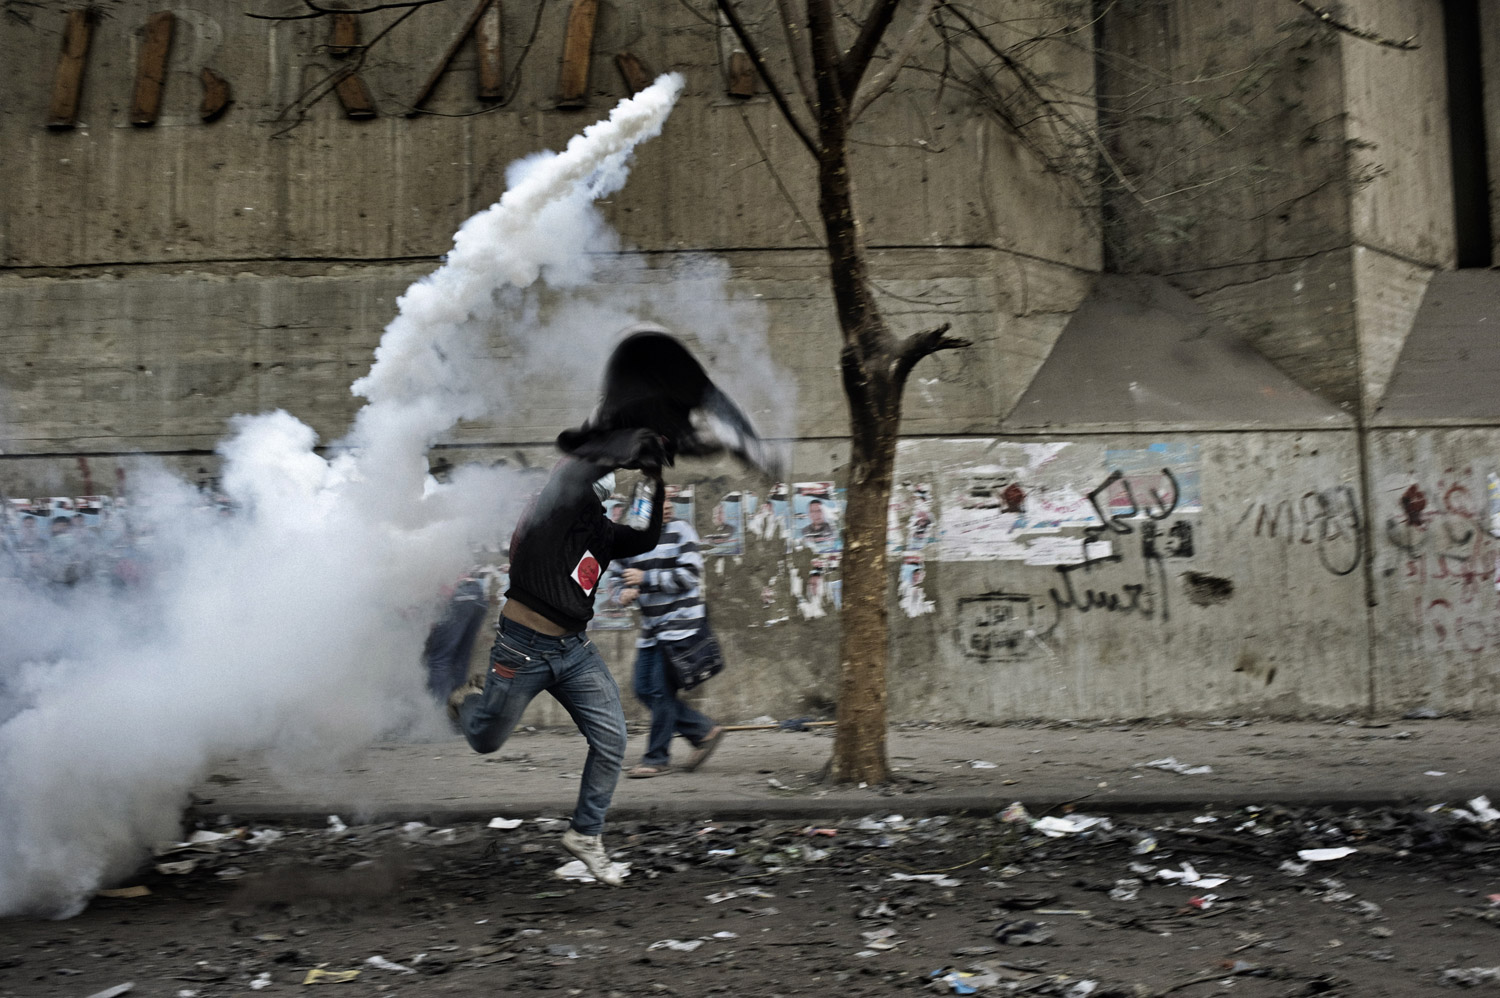 A protester slings a tear gas canister towards Egyptian security forces during clashes, November 23, 2011.